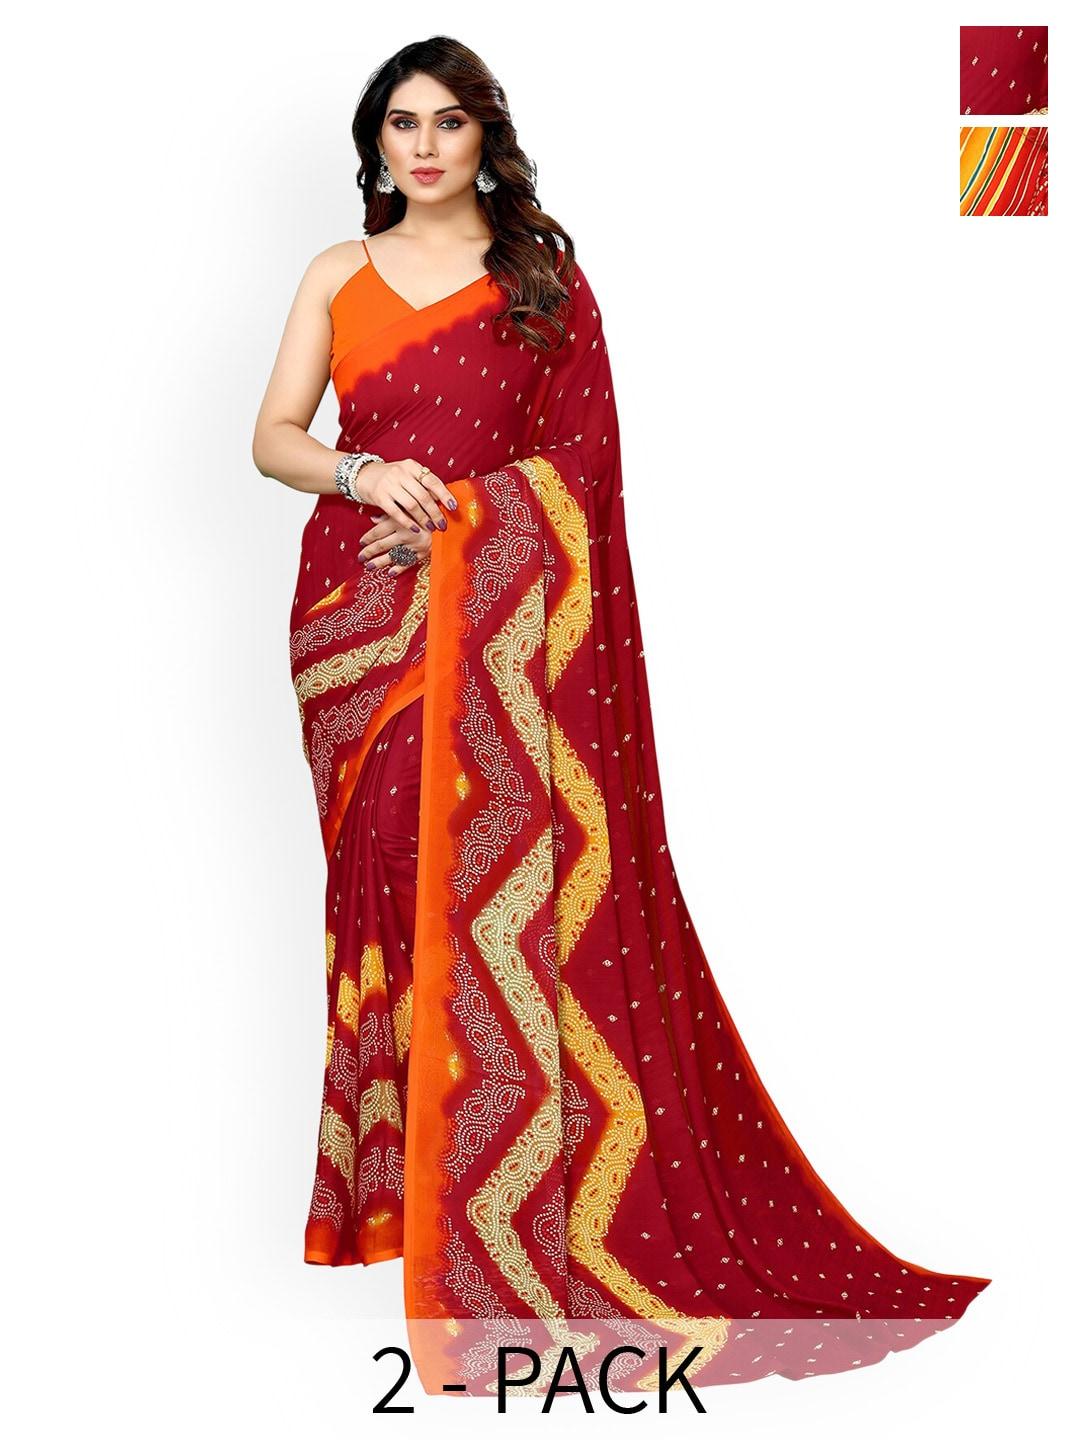 KALINI Selection Of 2 Printed Pure Georgette Sarees